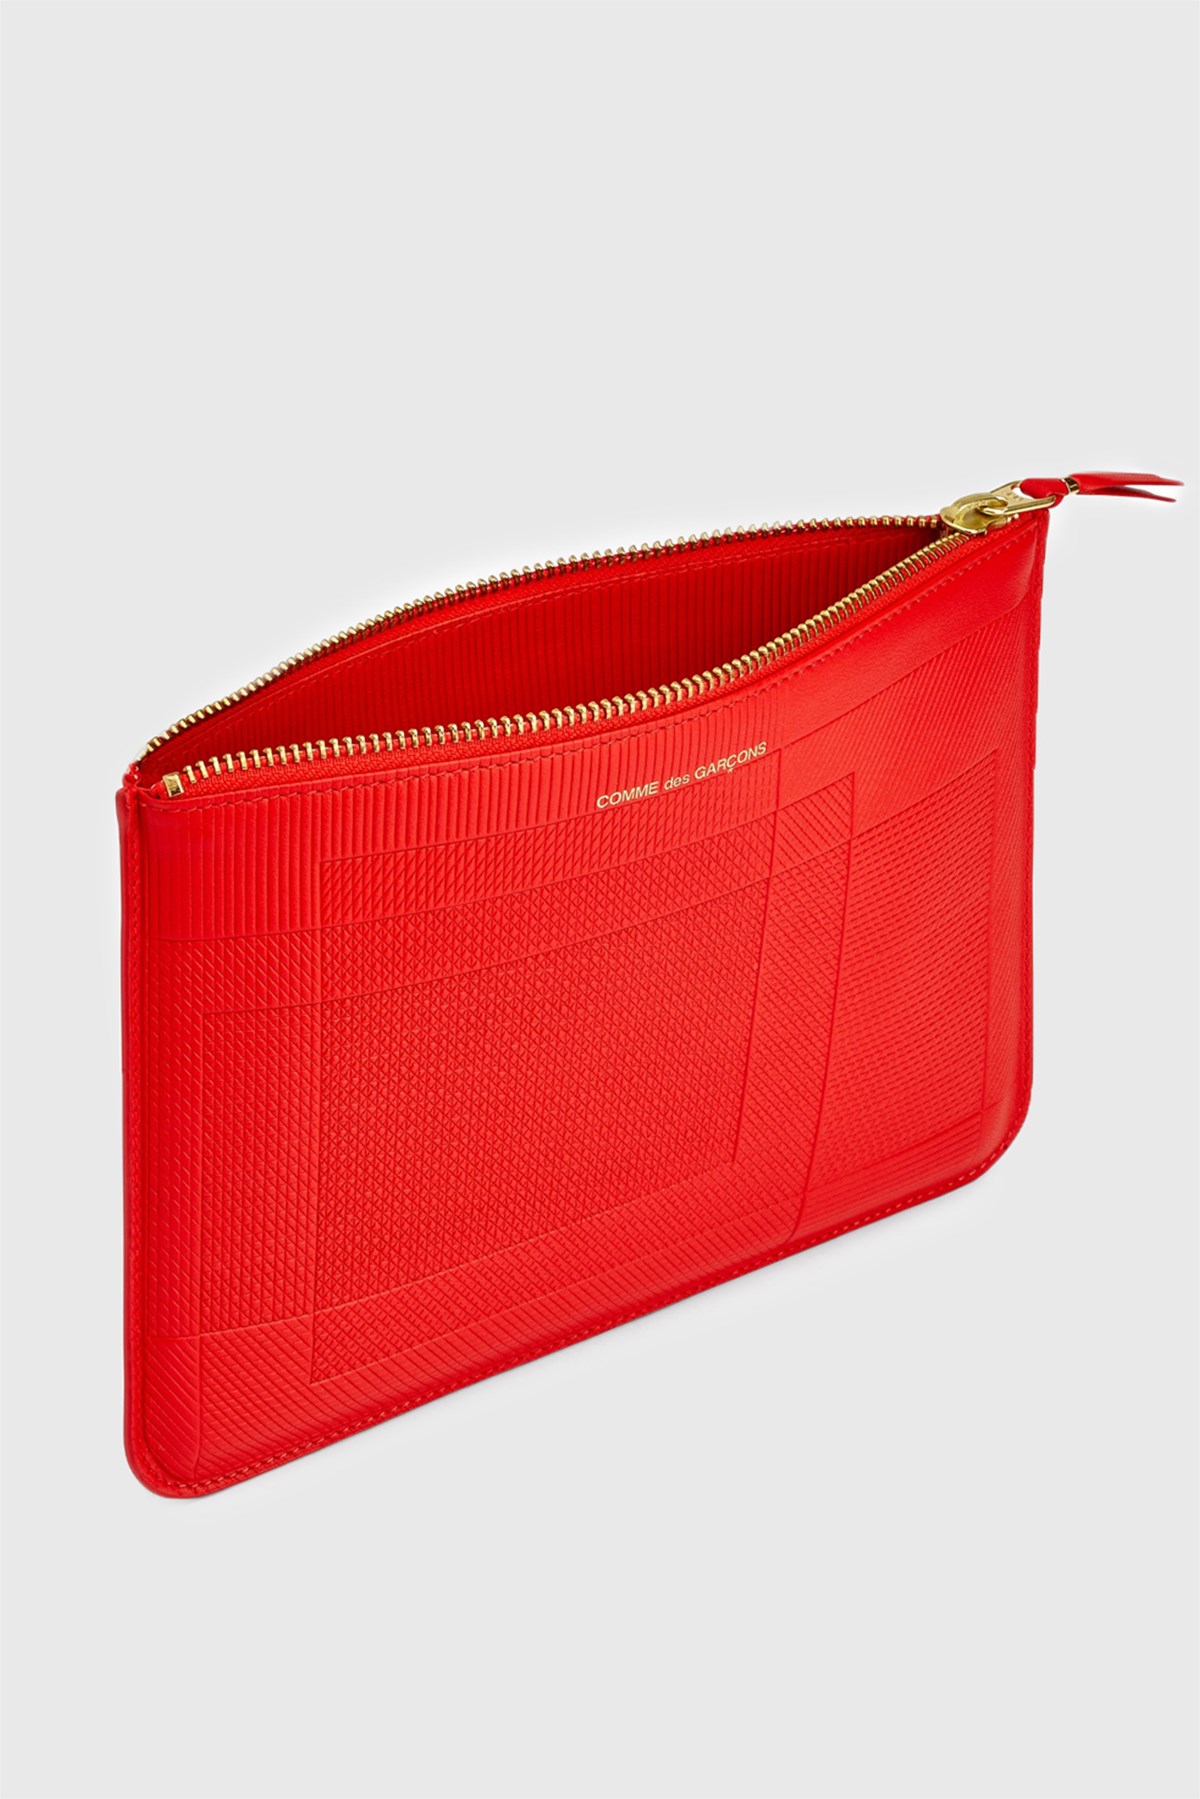 Comme des Garçons Intersection Lines 1/2 Zip Wallet Red SA3100LS - NOW OR  NEVER